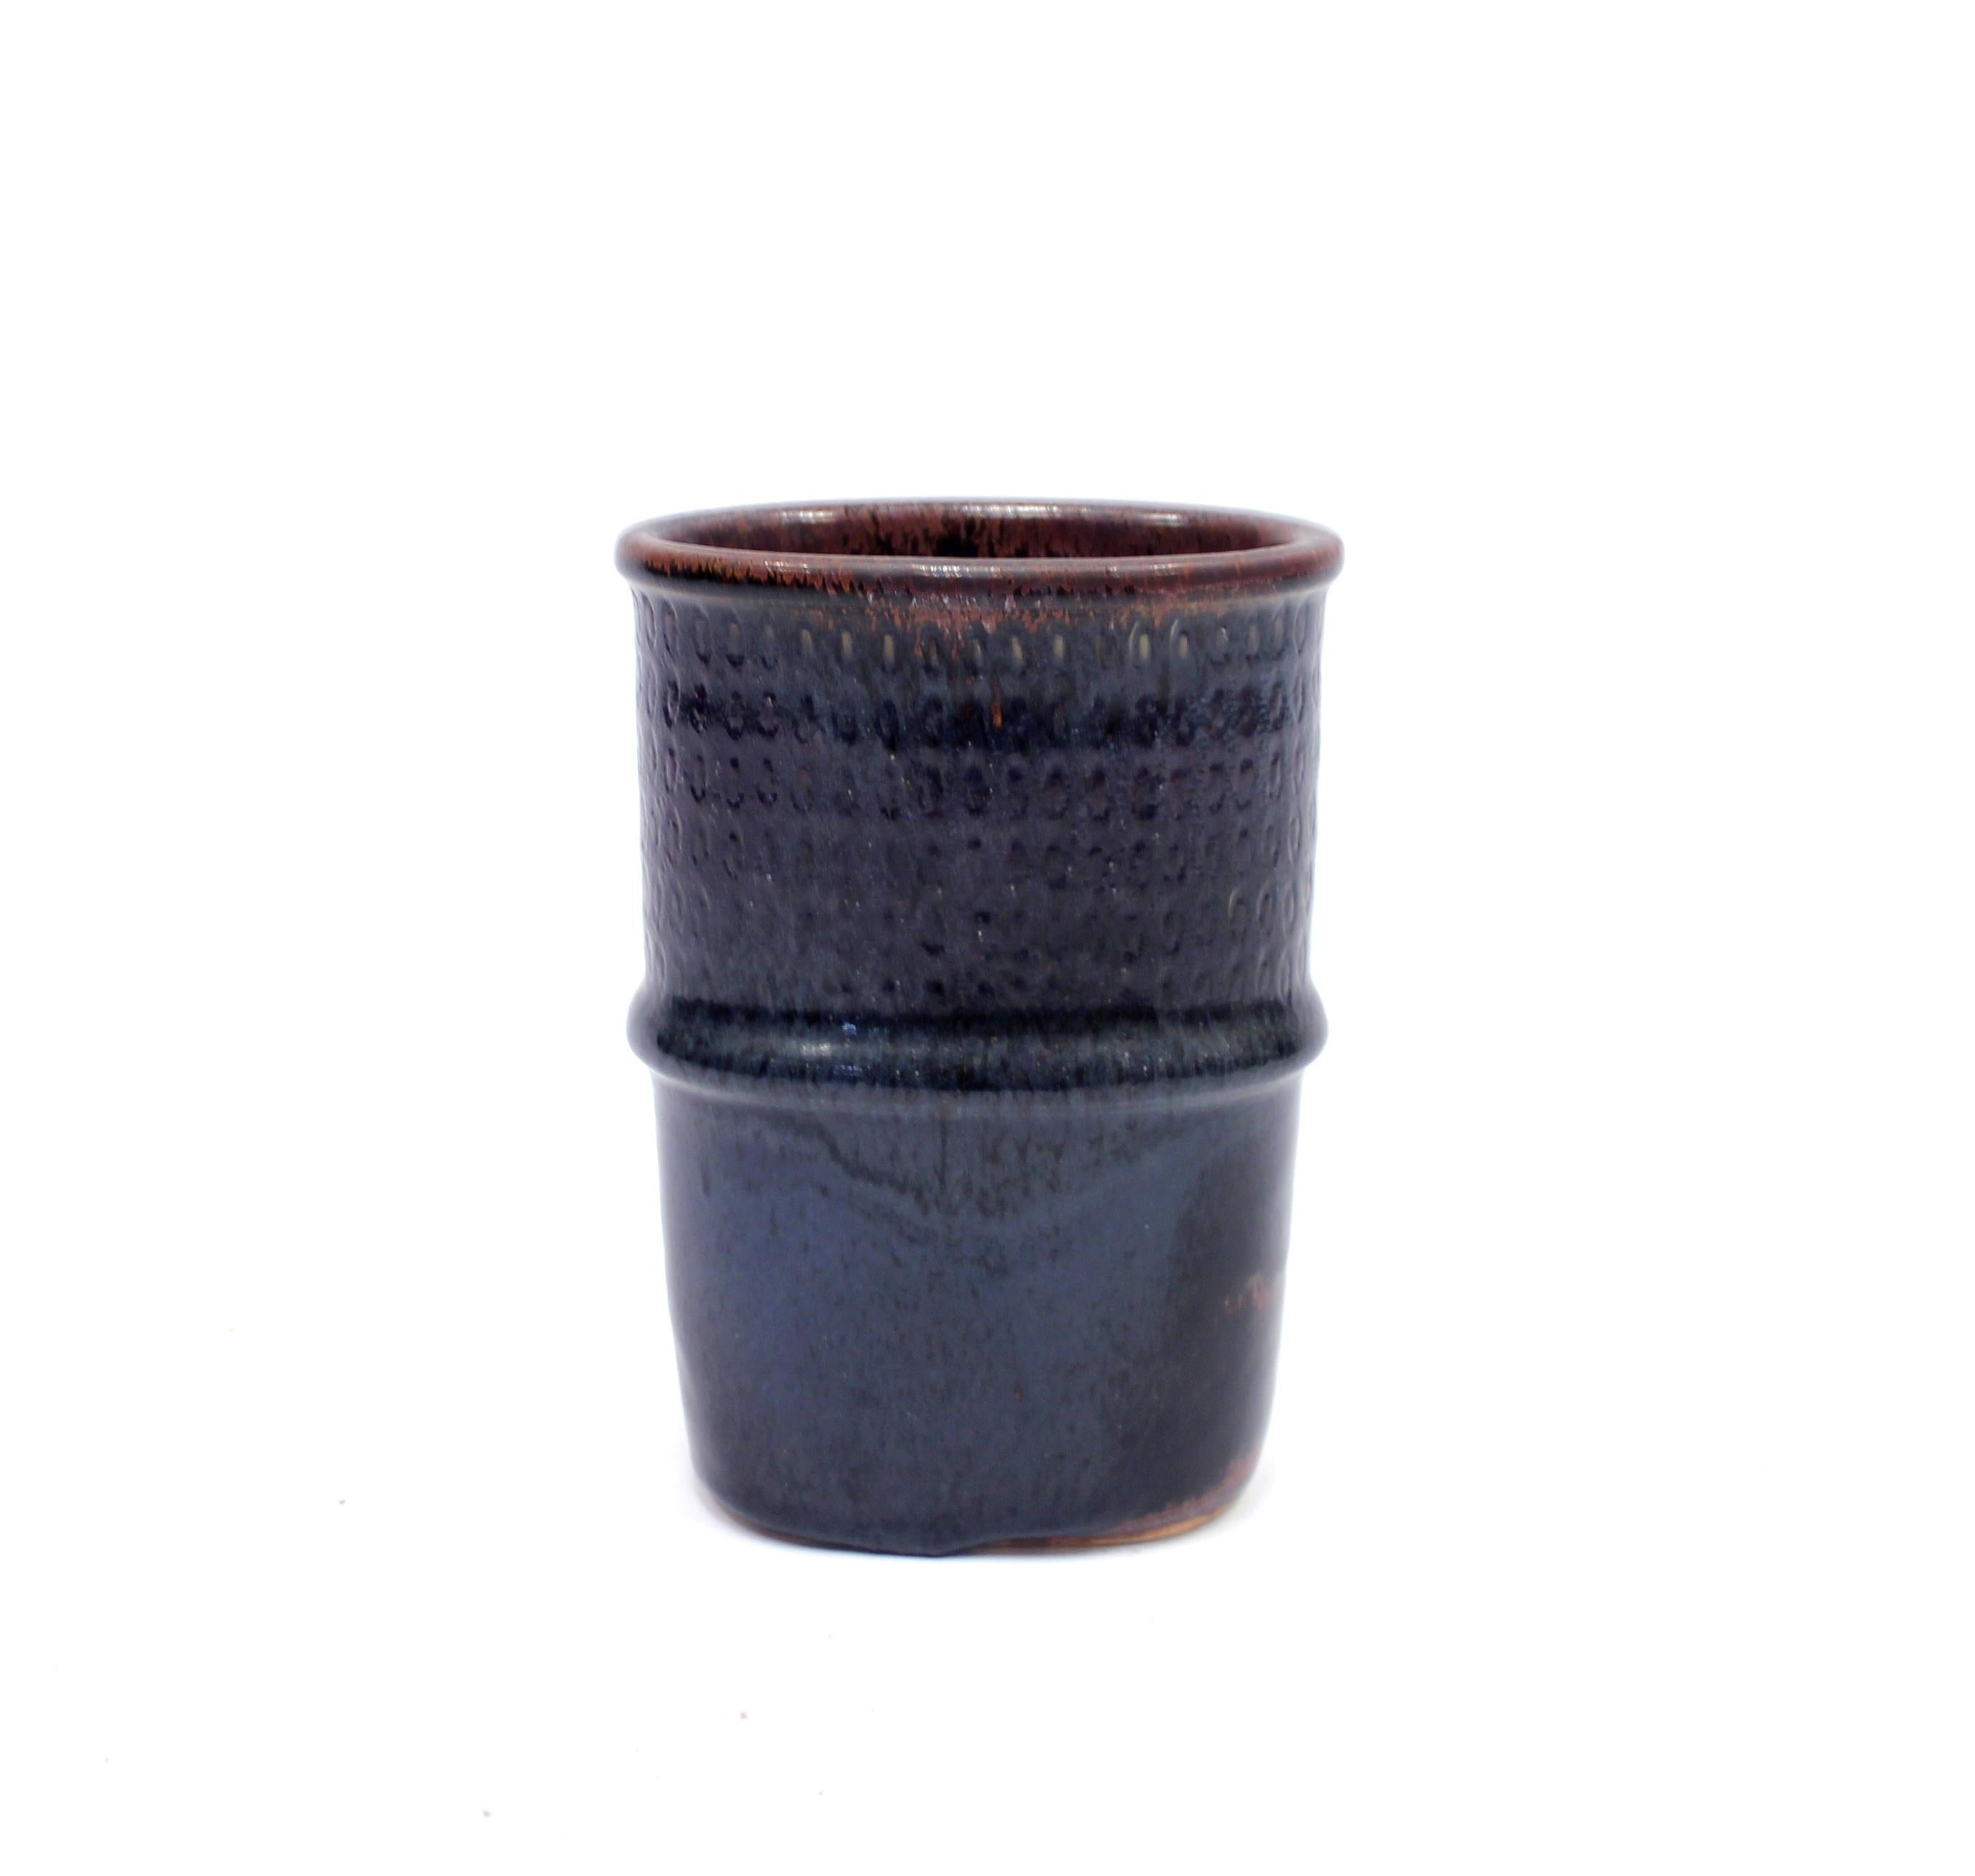 Blue/purple vase by renowned Swedish ceramicist Stig Lindberg for his long time collaborator Gustavsberg. Inside with brown/black finish. Made in the 1950s. Very good condition with light ware consistent with age and use. Hand signed on the bottom.